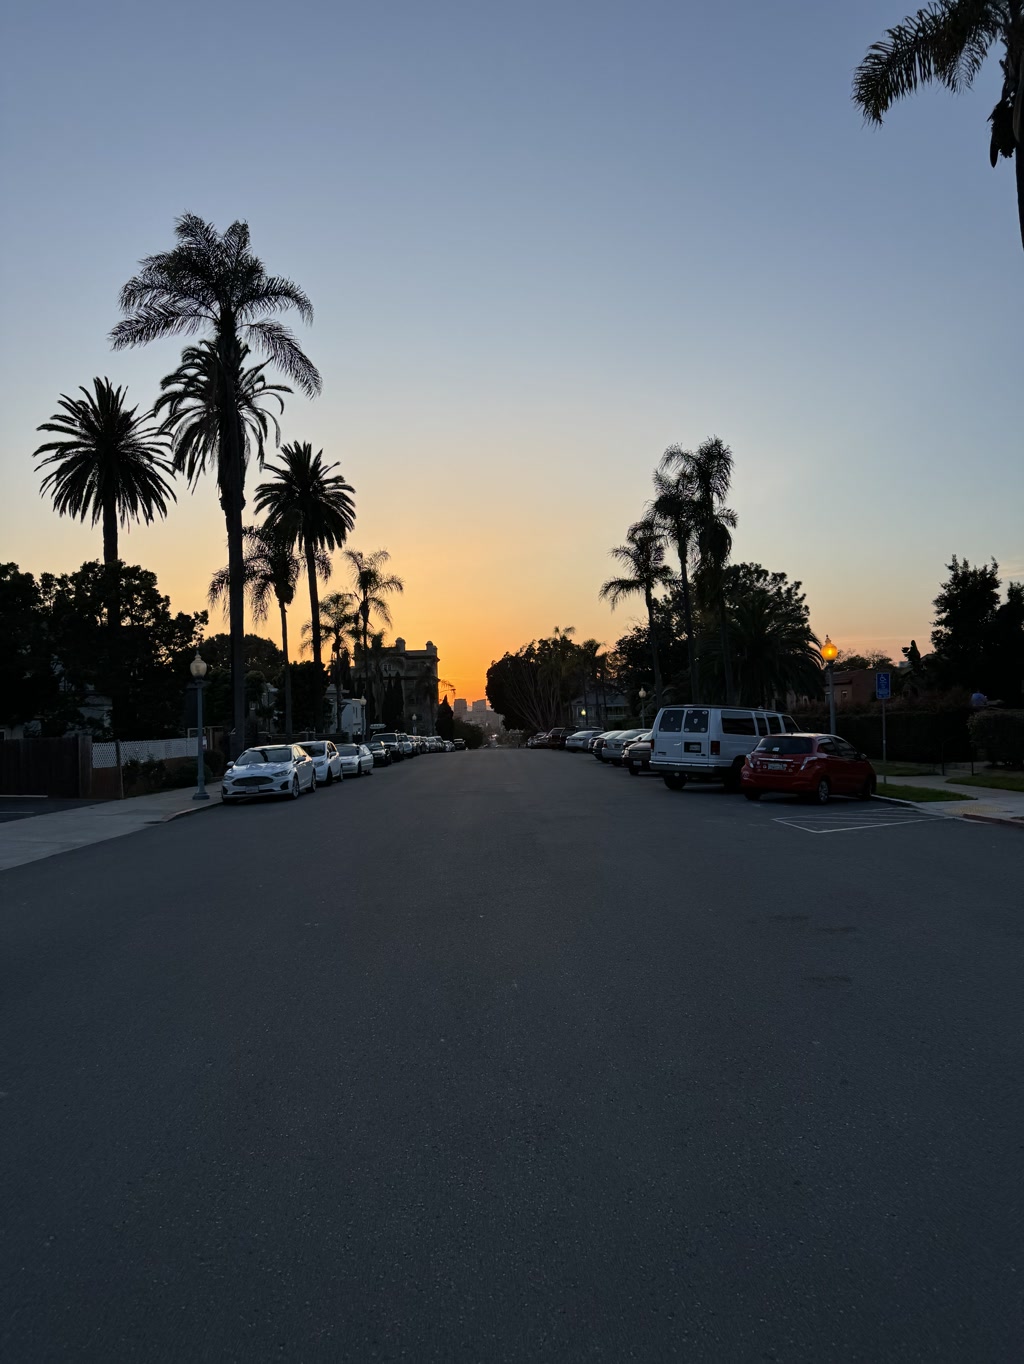 A serene dusky sky gradients from deep blue to a warm orange along the horizon. Tall palm trees line both sides of a street, standing out in silhouette against the twilight. The street is calm with parked cars on both sides, and the road stretches toward the setting sun. The environment is quiet, with no visible people or moving vehicles, suggesting a tranquil suburban setting in the evening.